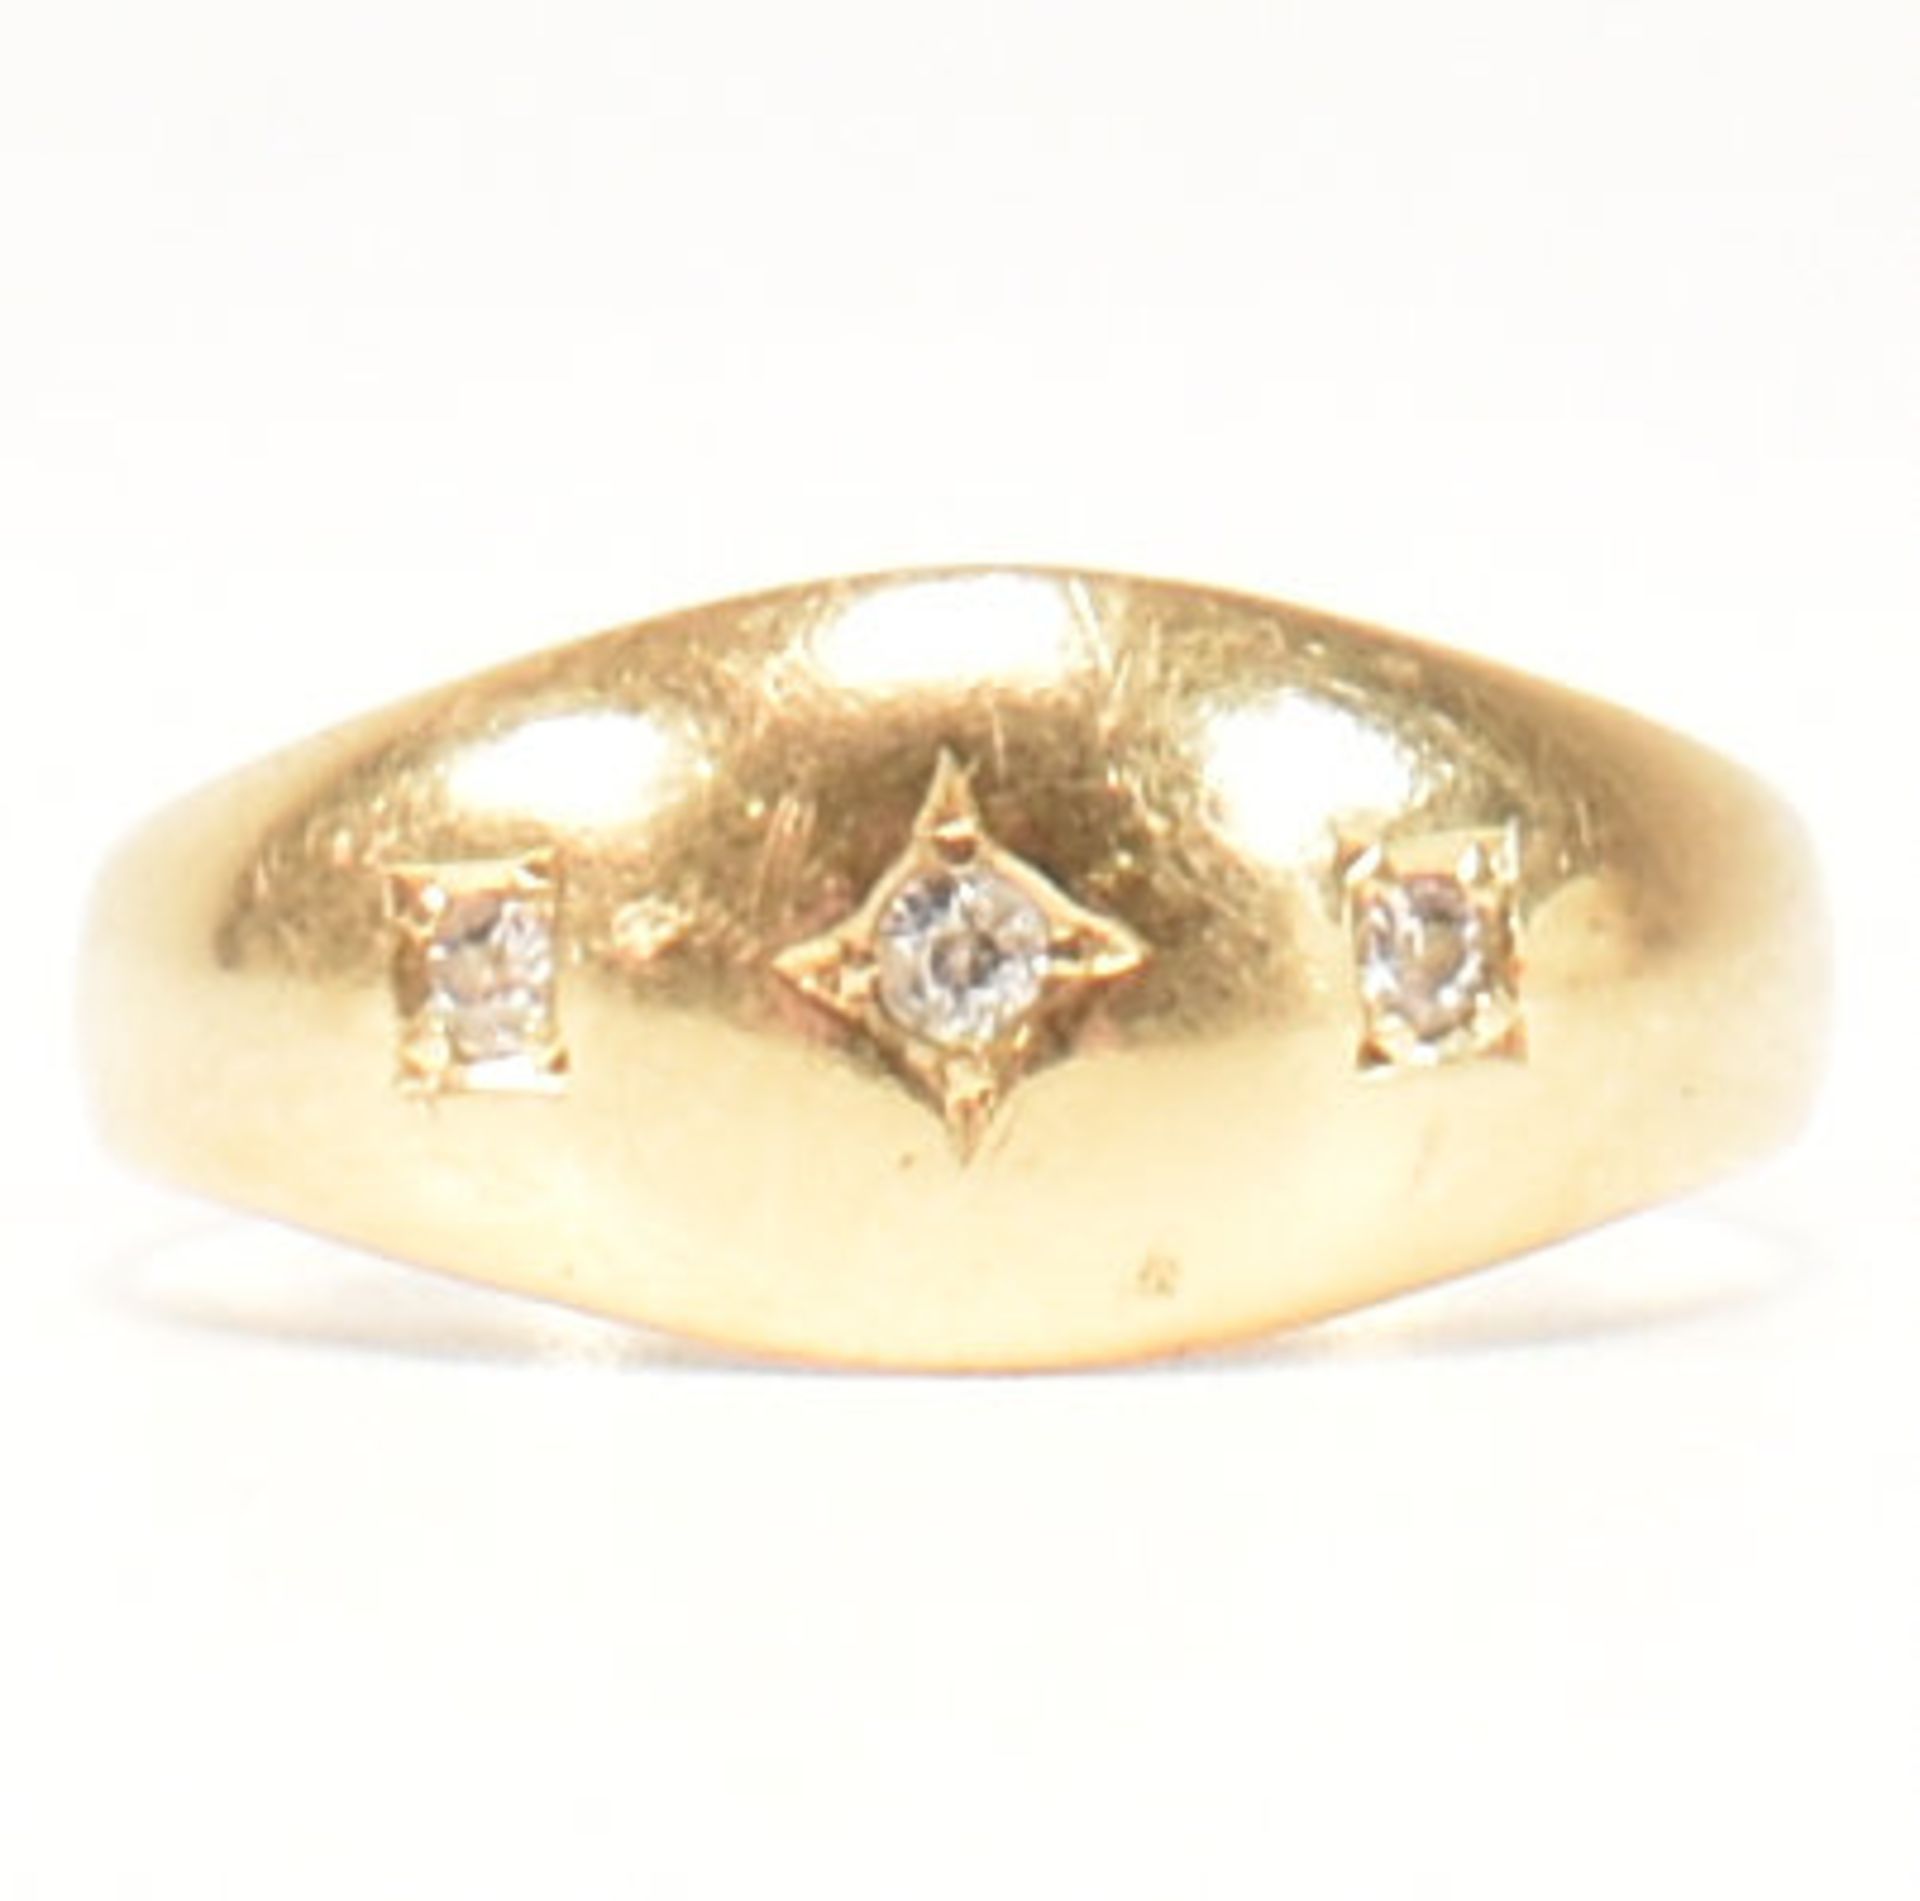 EARLY 20TH CENTURY 18CT GOLD & DIAMOND GYPSY RING